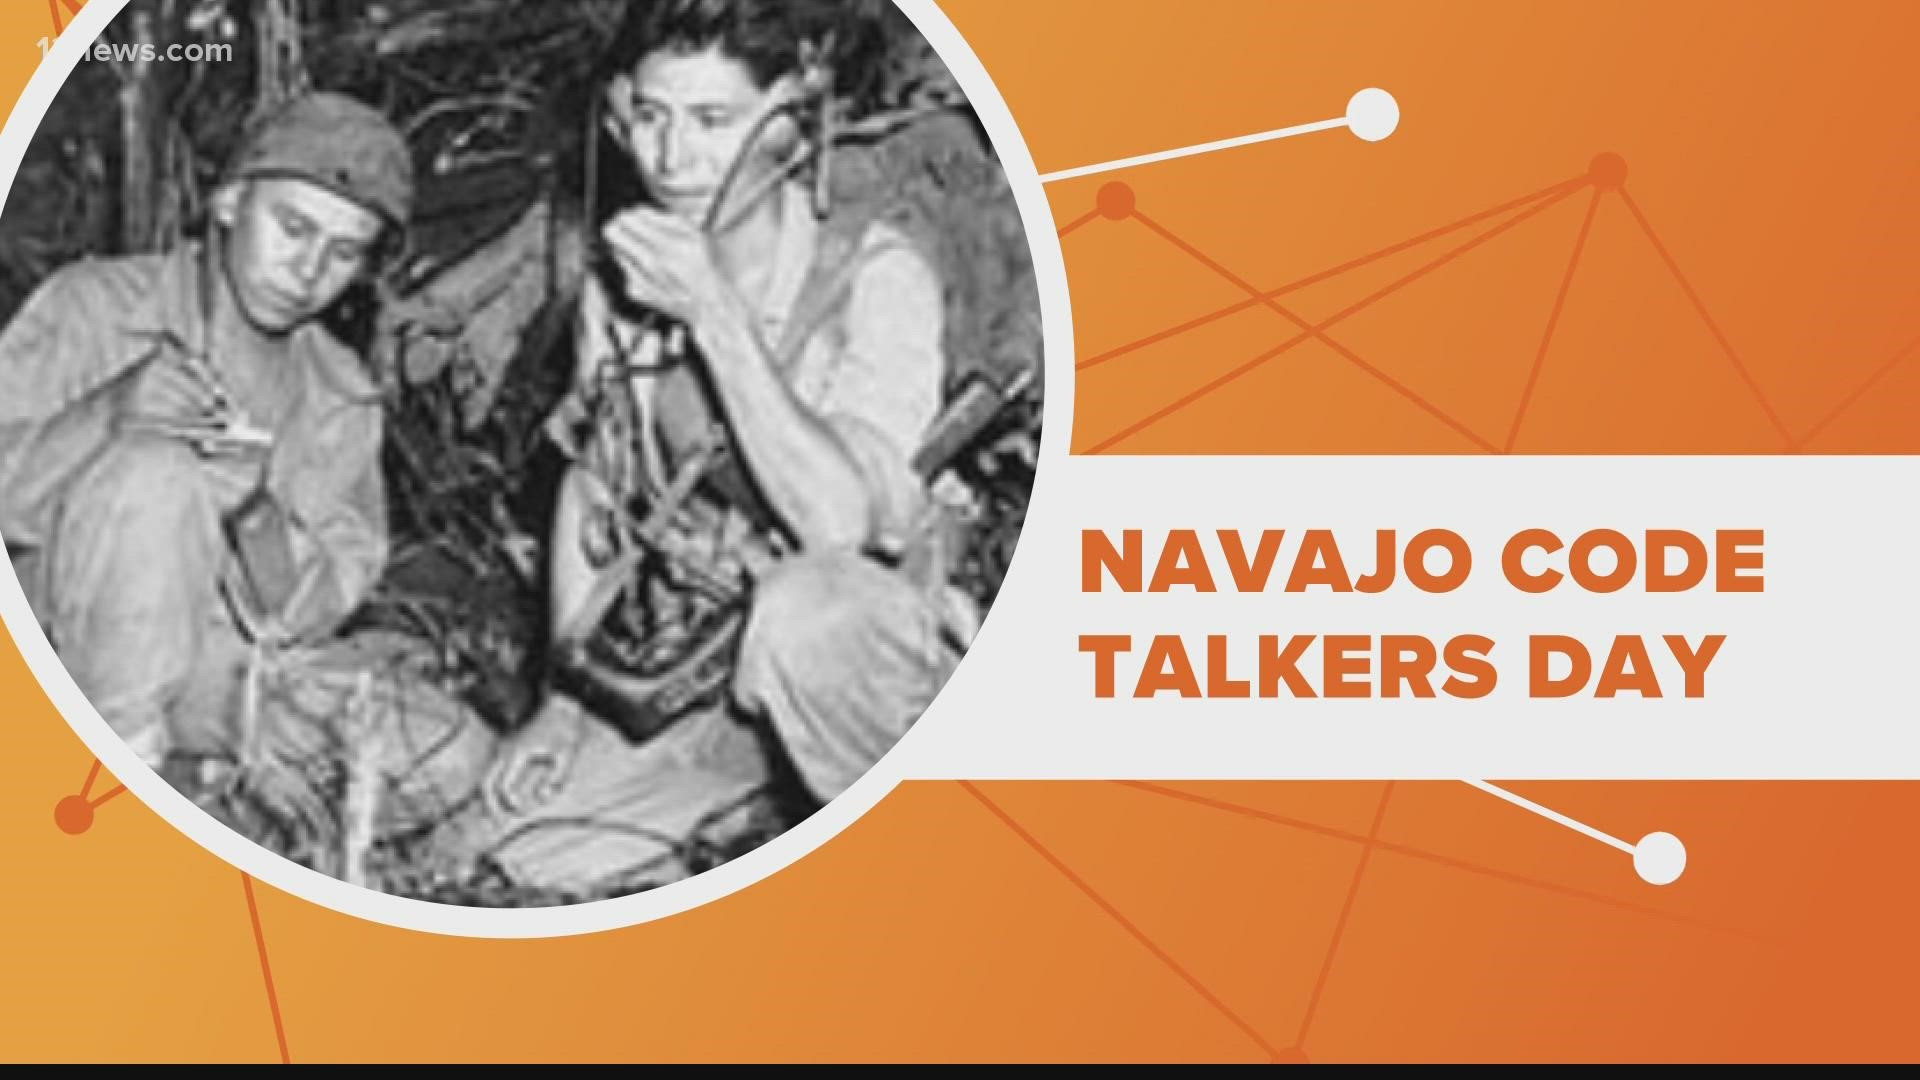 We take a closer look at the history of Navajo Code Talkers Day and honor all those who served on the project during the war.